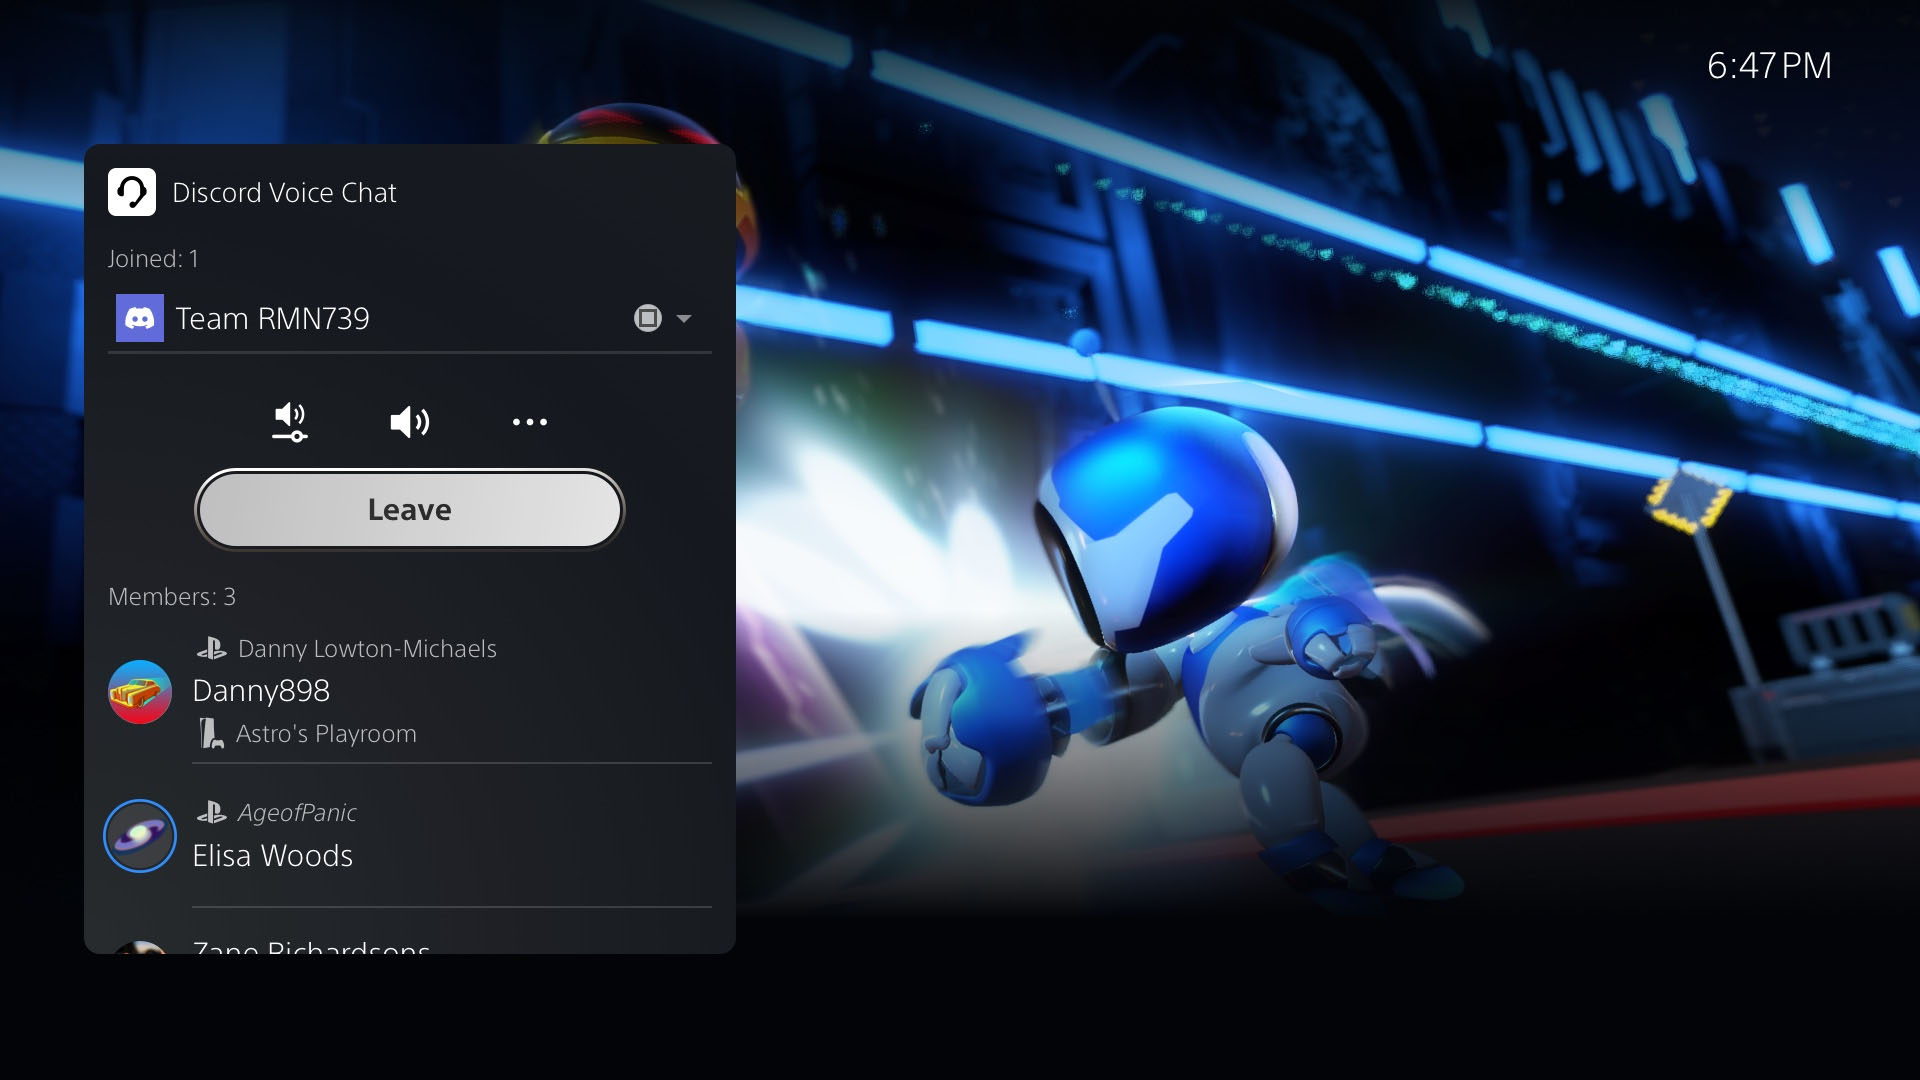 PS5 is finally getting Discord voice support in new system update